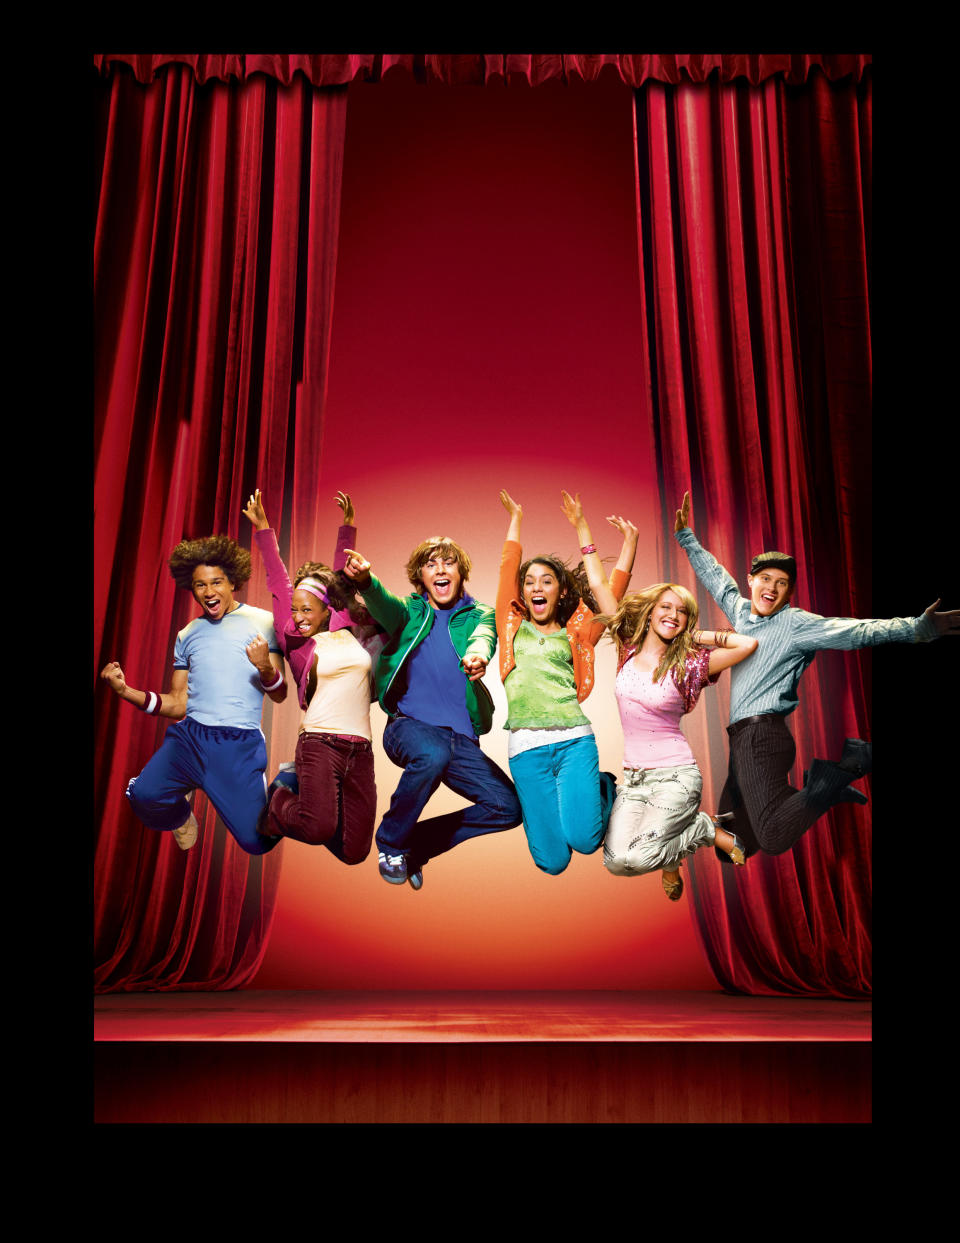 Poster for "High School Musical" featuring the main cast jumping in the air